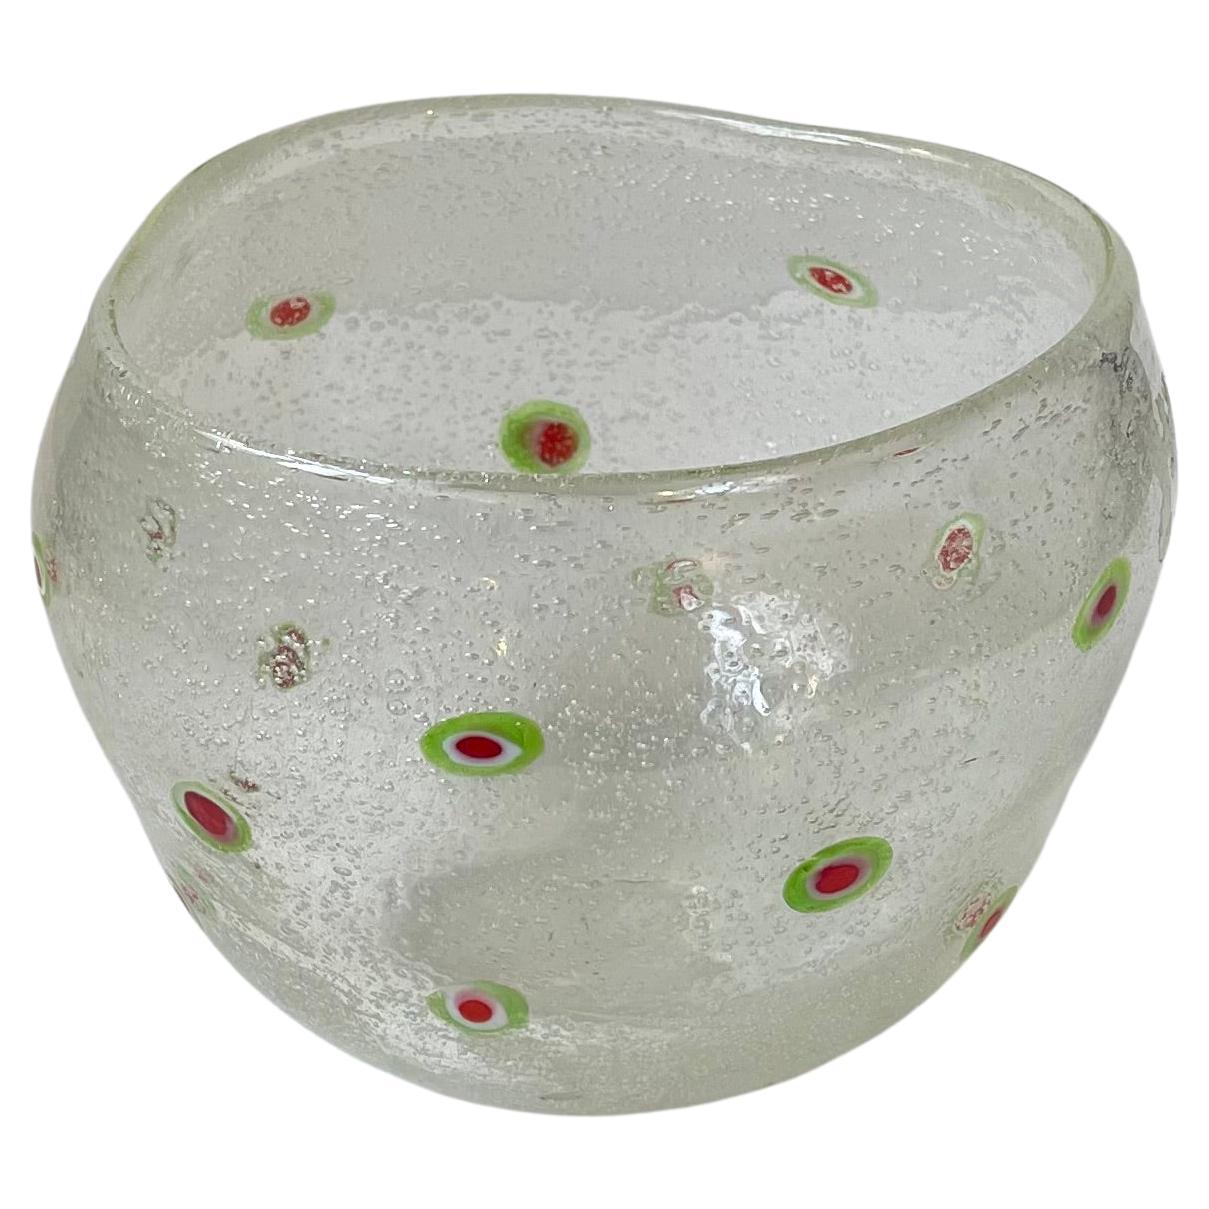 Hand-Blown Italian Art Glass Bowl with Air Bubbles & Flowers, 1960s